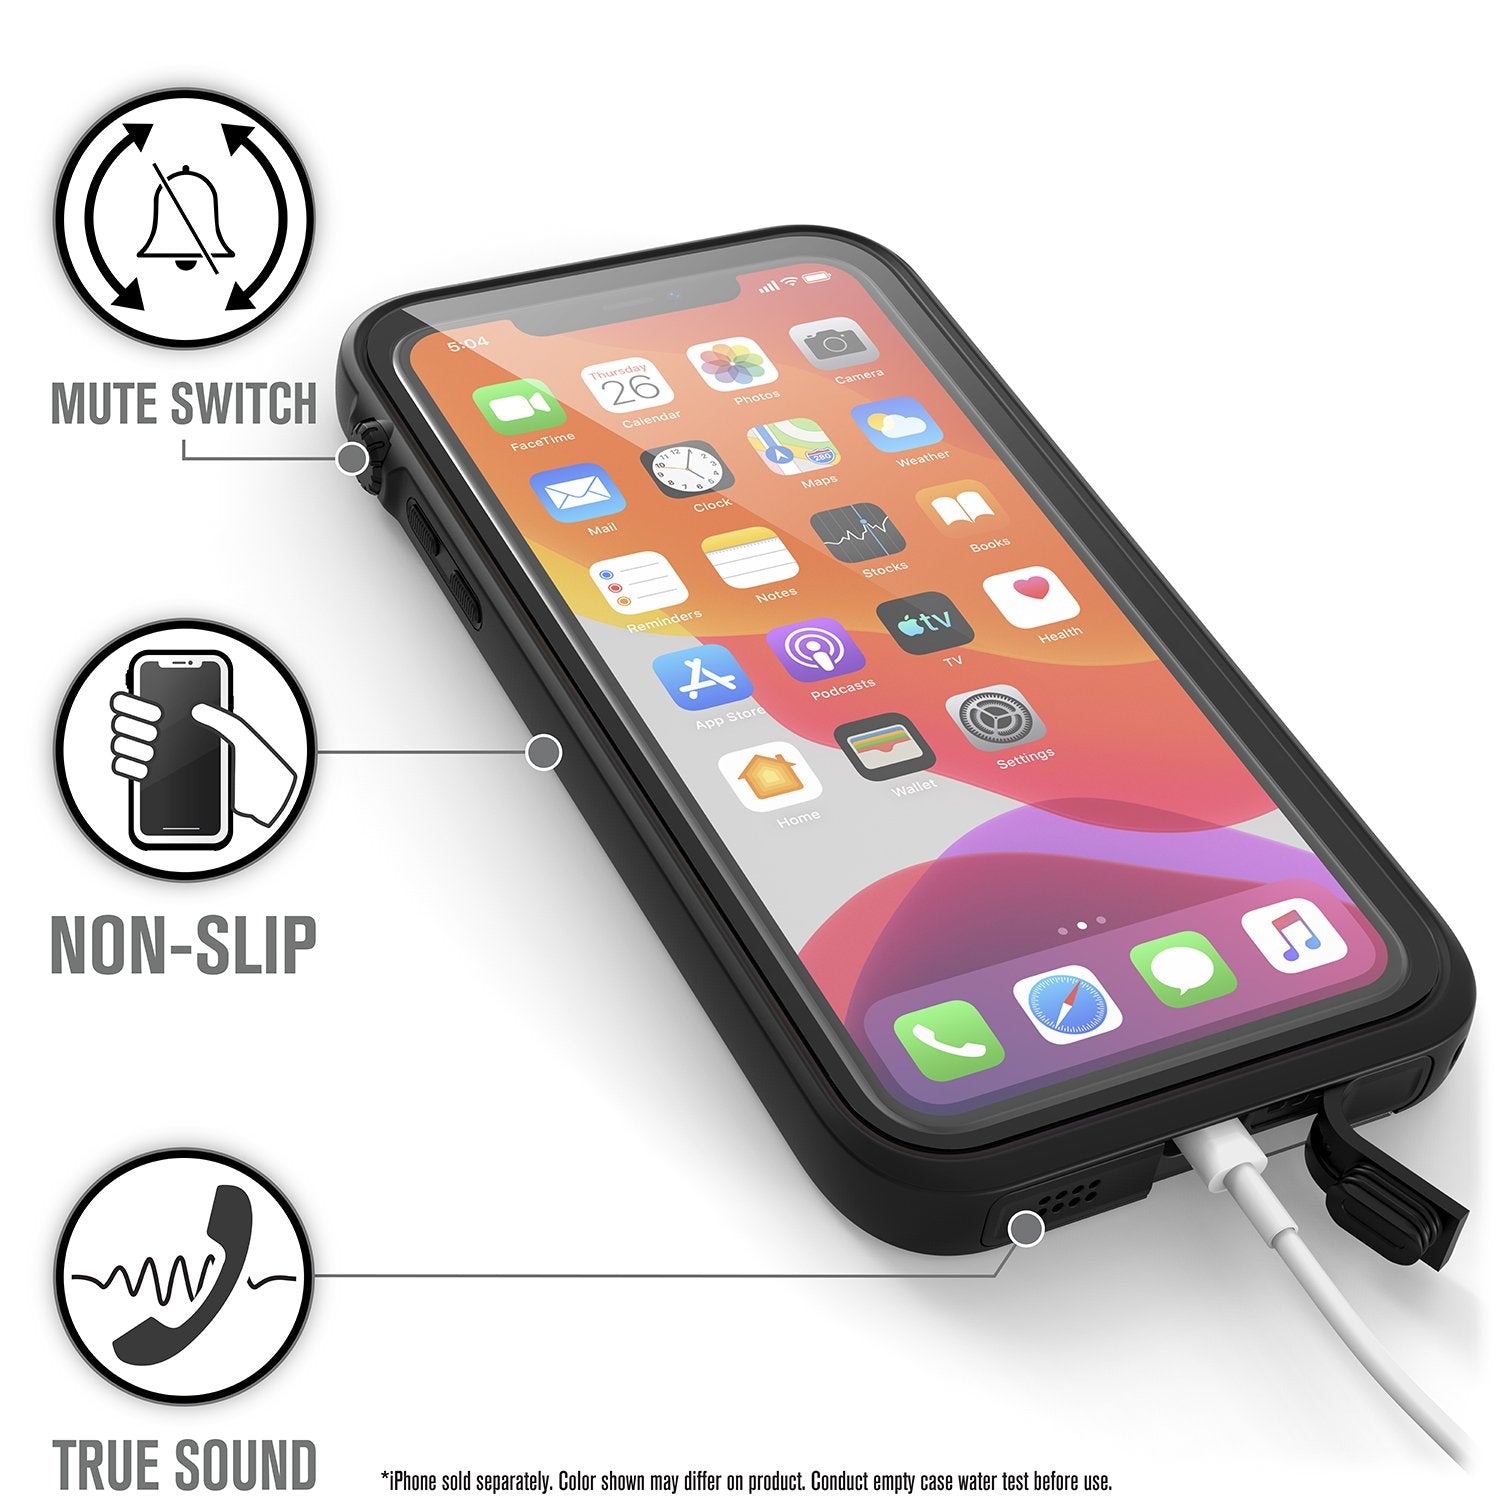 Catalyst iphone 11 pro max waterproof case showing the case features in stealth colorway tex reads mute switch non slip true sound